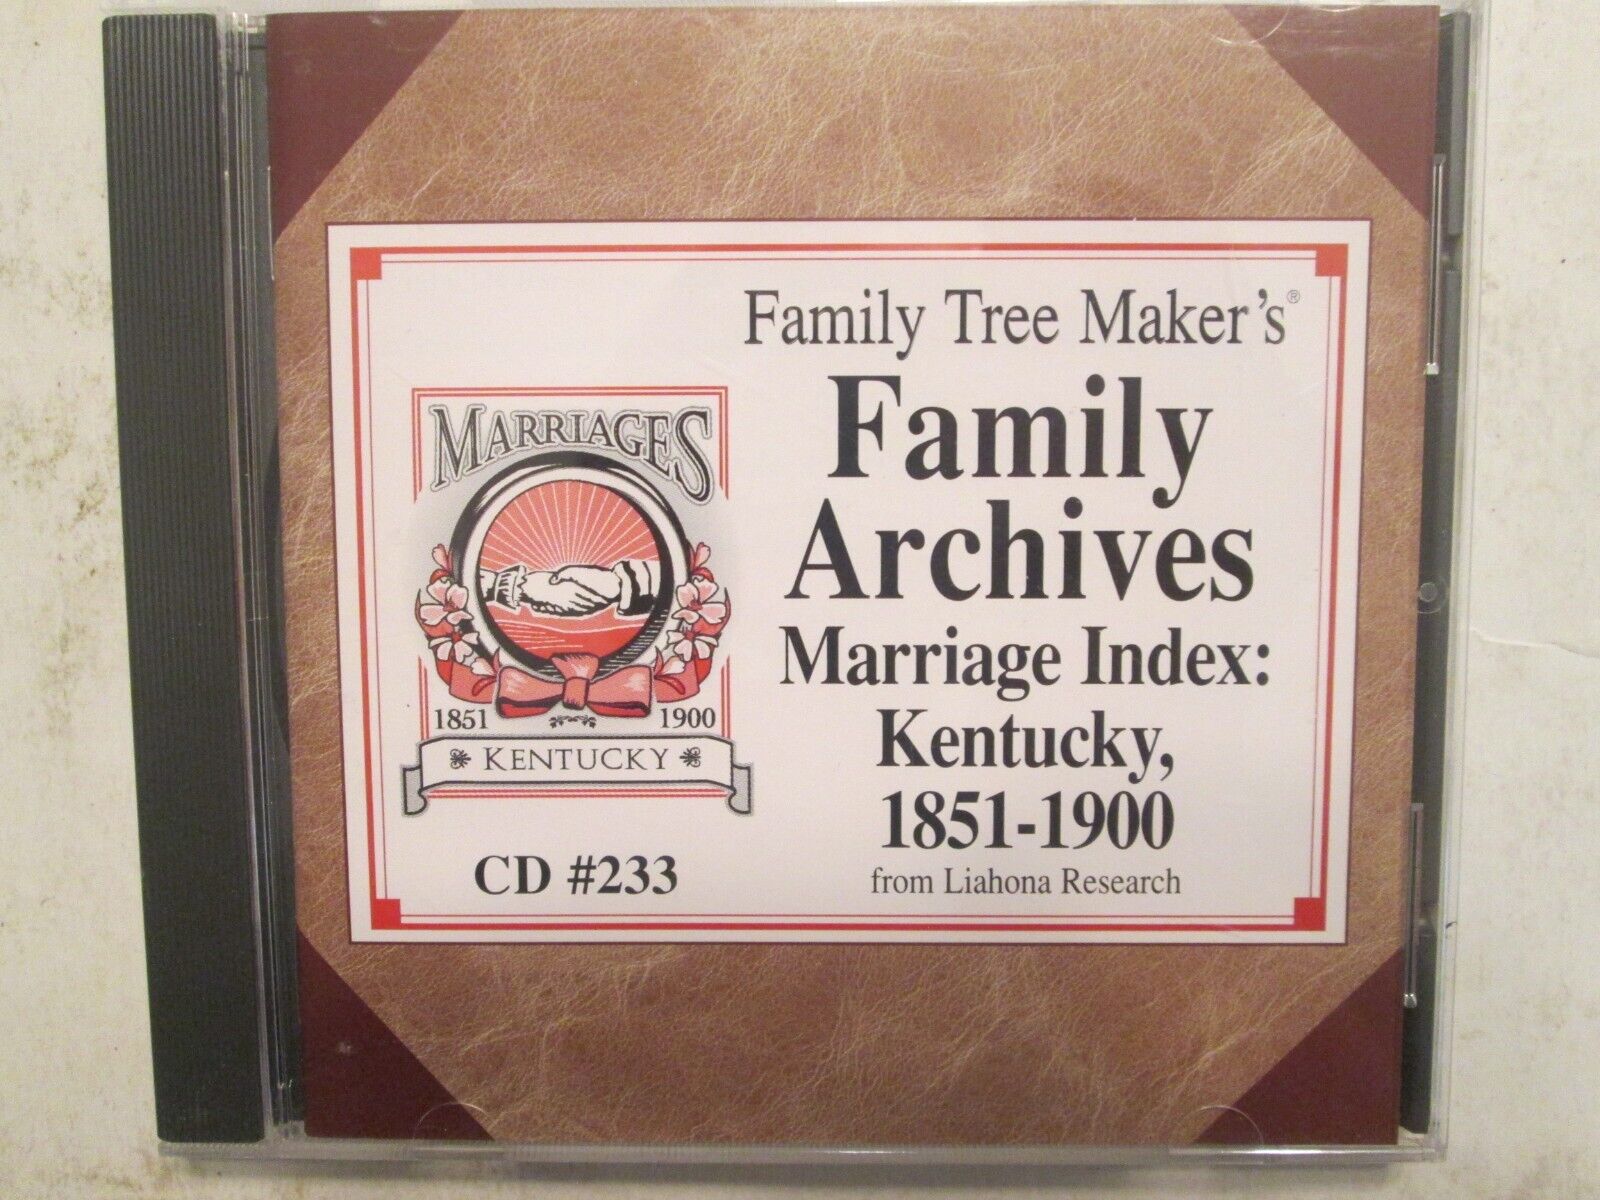 Family Tree Maker's Family Archives - Marriage Index Kentucky 1851-1900